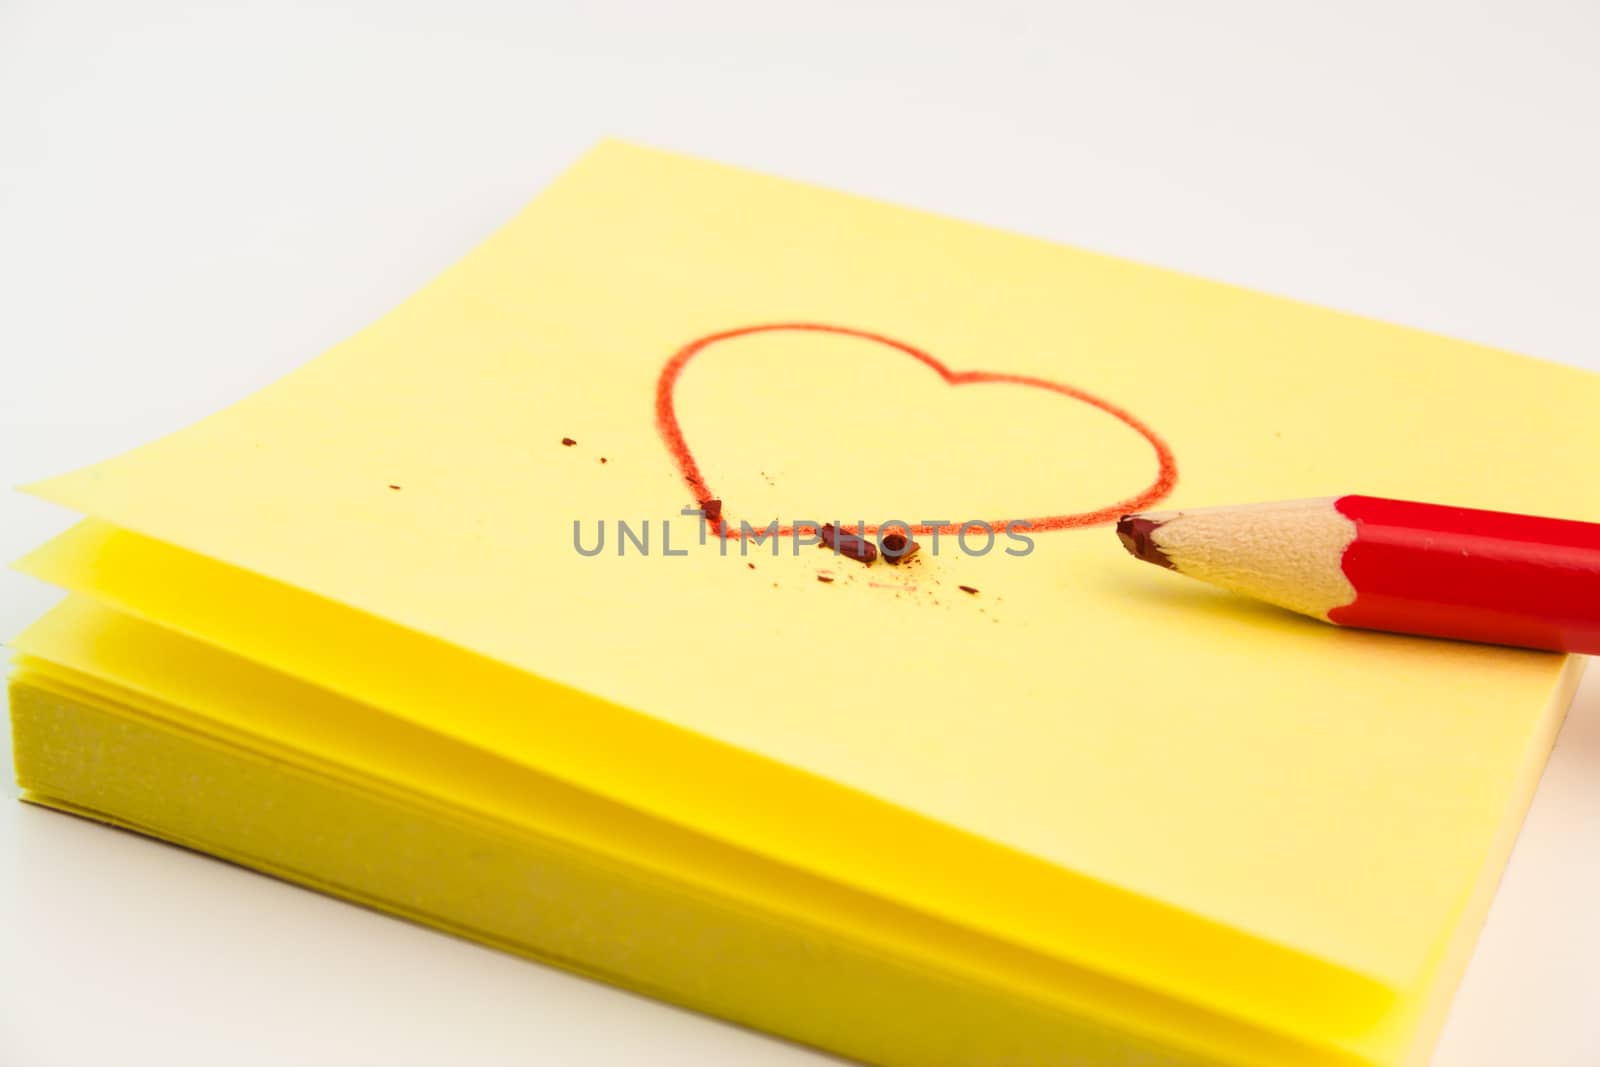 detail of a red heart drawn on a post-it with a pencil